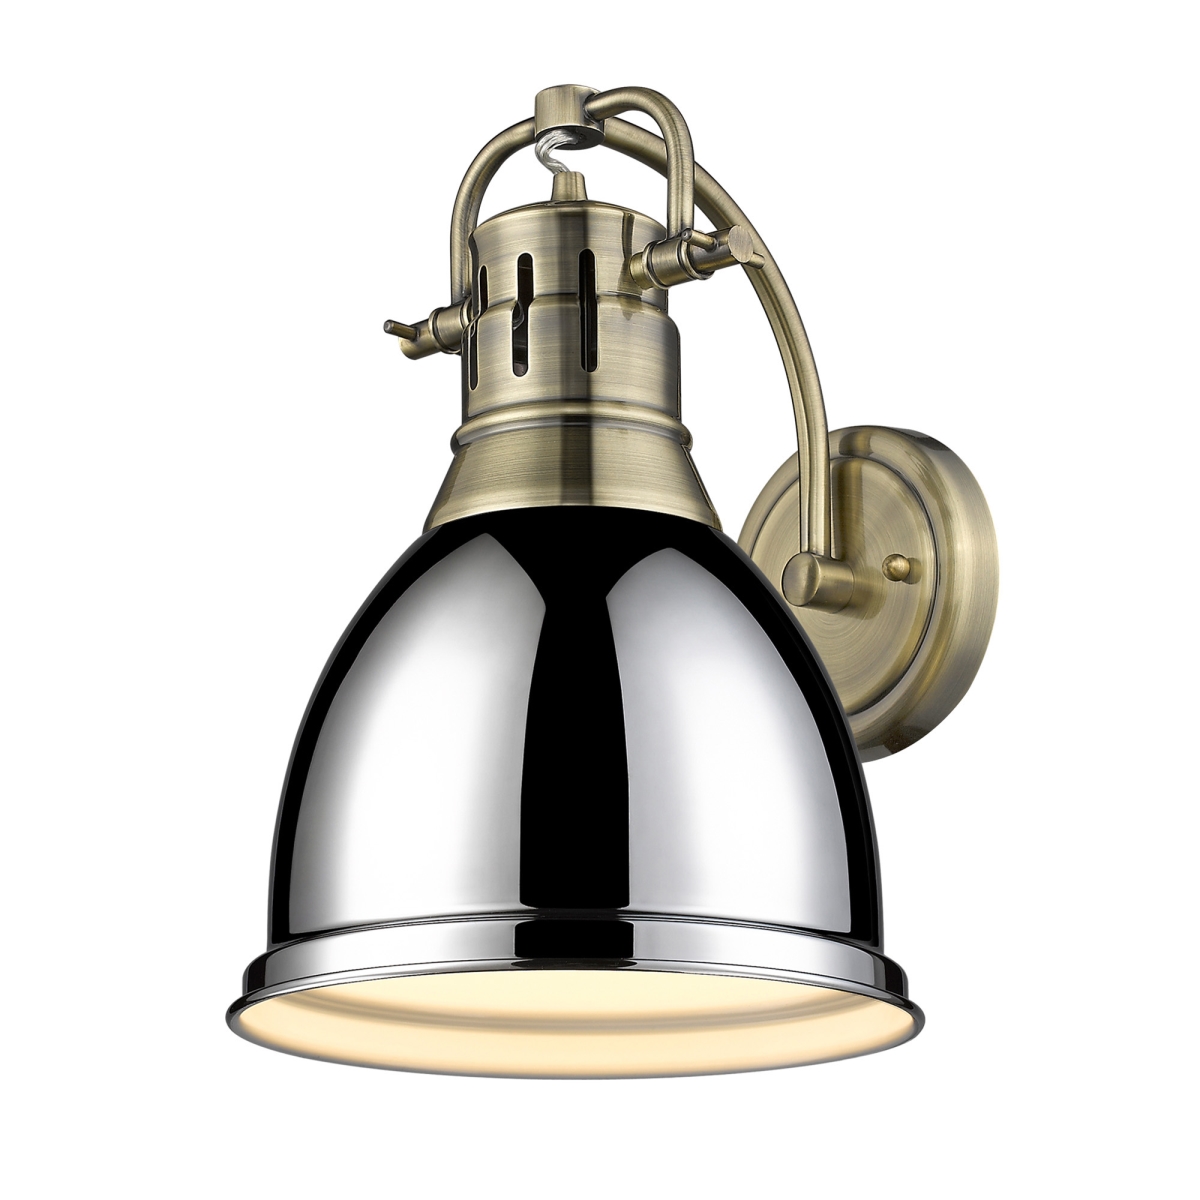 3602-1w Ab-ch Duncan 1 Light Wall Sconce In Aged Brass With A Chrome Shade